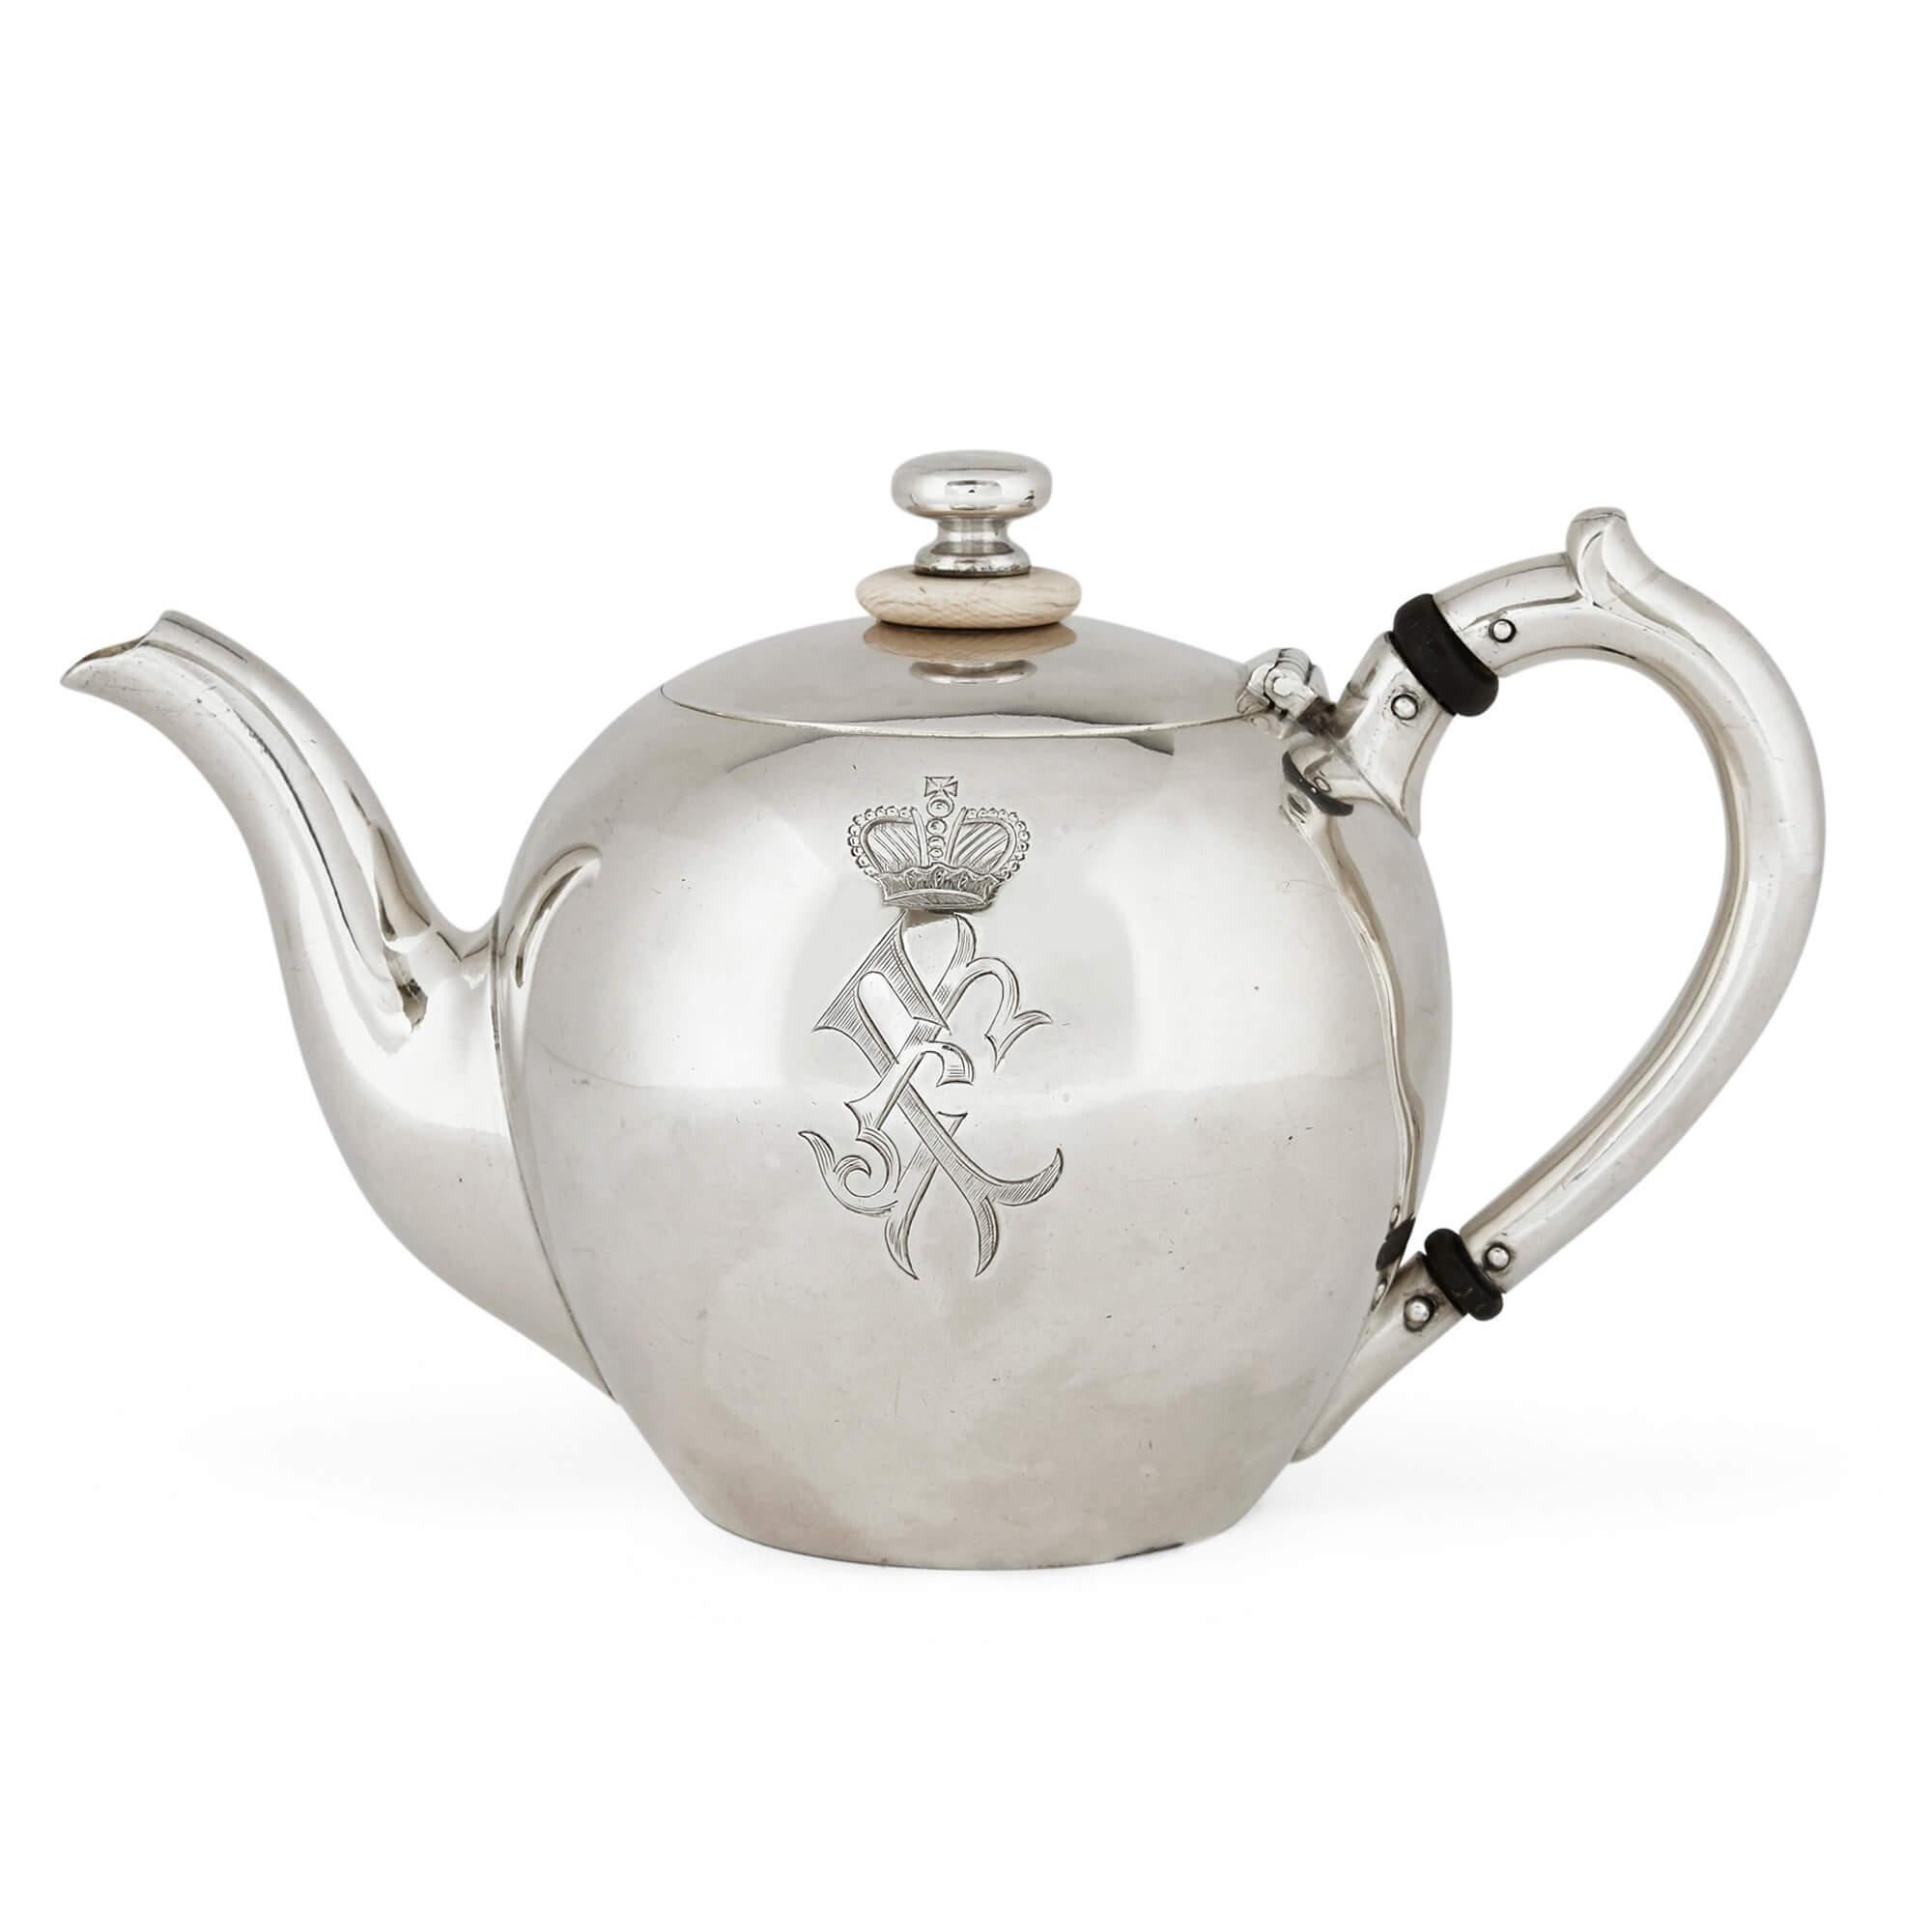 This fine and charming silver tea-set comprises a teapot, a sugar pot with a spoon and two jugs; one smaller and one larger. Each piece features an engraved crest and crown to their bodies, as well as gilt interiors and full hallmarks. Made c.1900